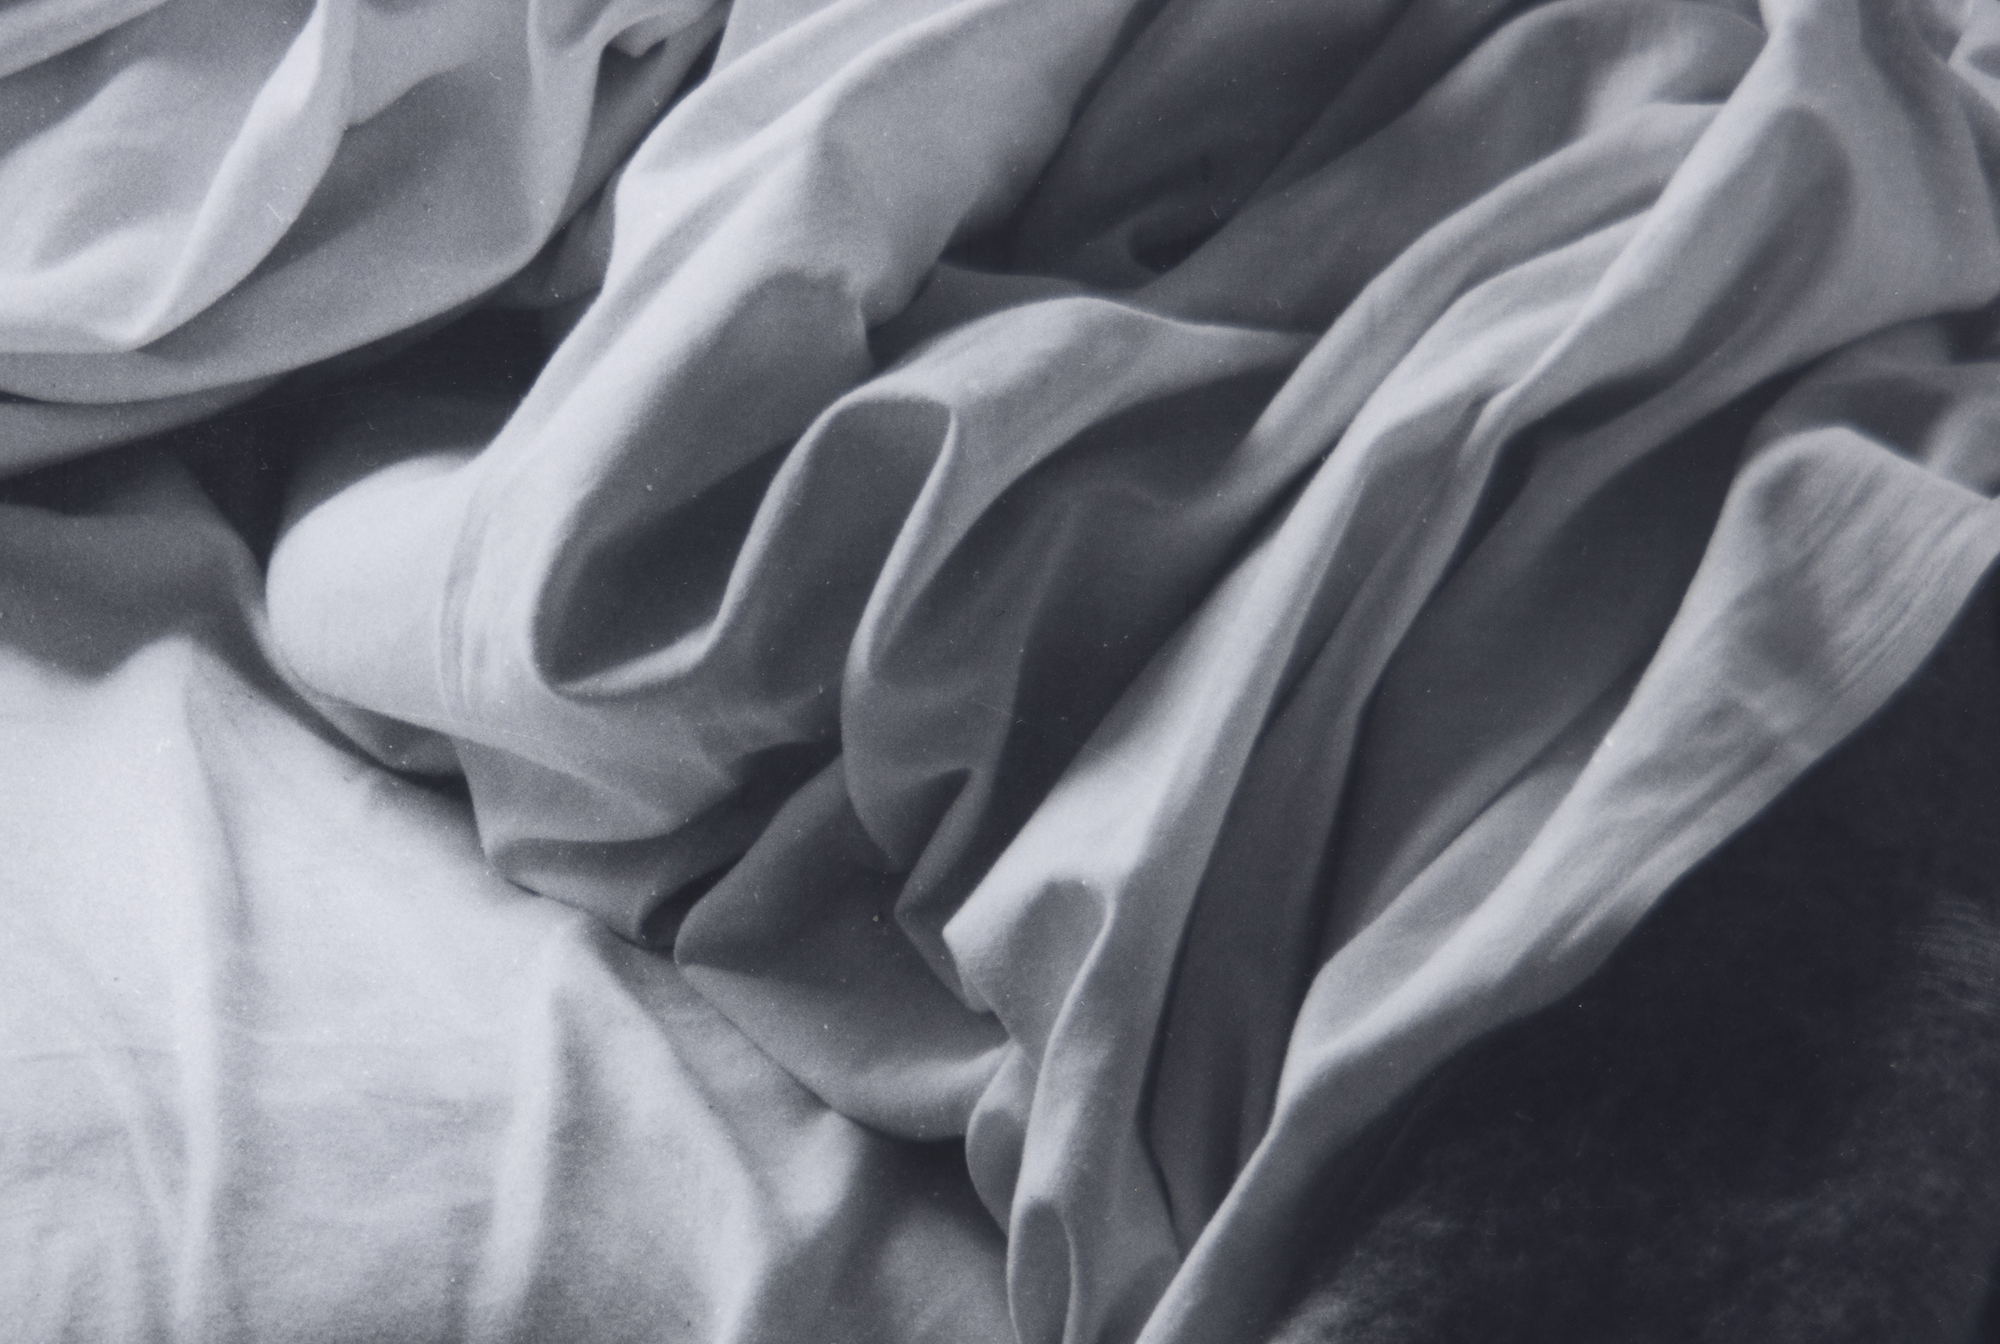 IMOGEN CUNNINGHAM - The Unmade Bed - silver gelatin print - 10 1/4 x 13 1/2 in.